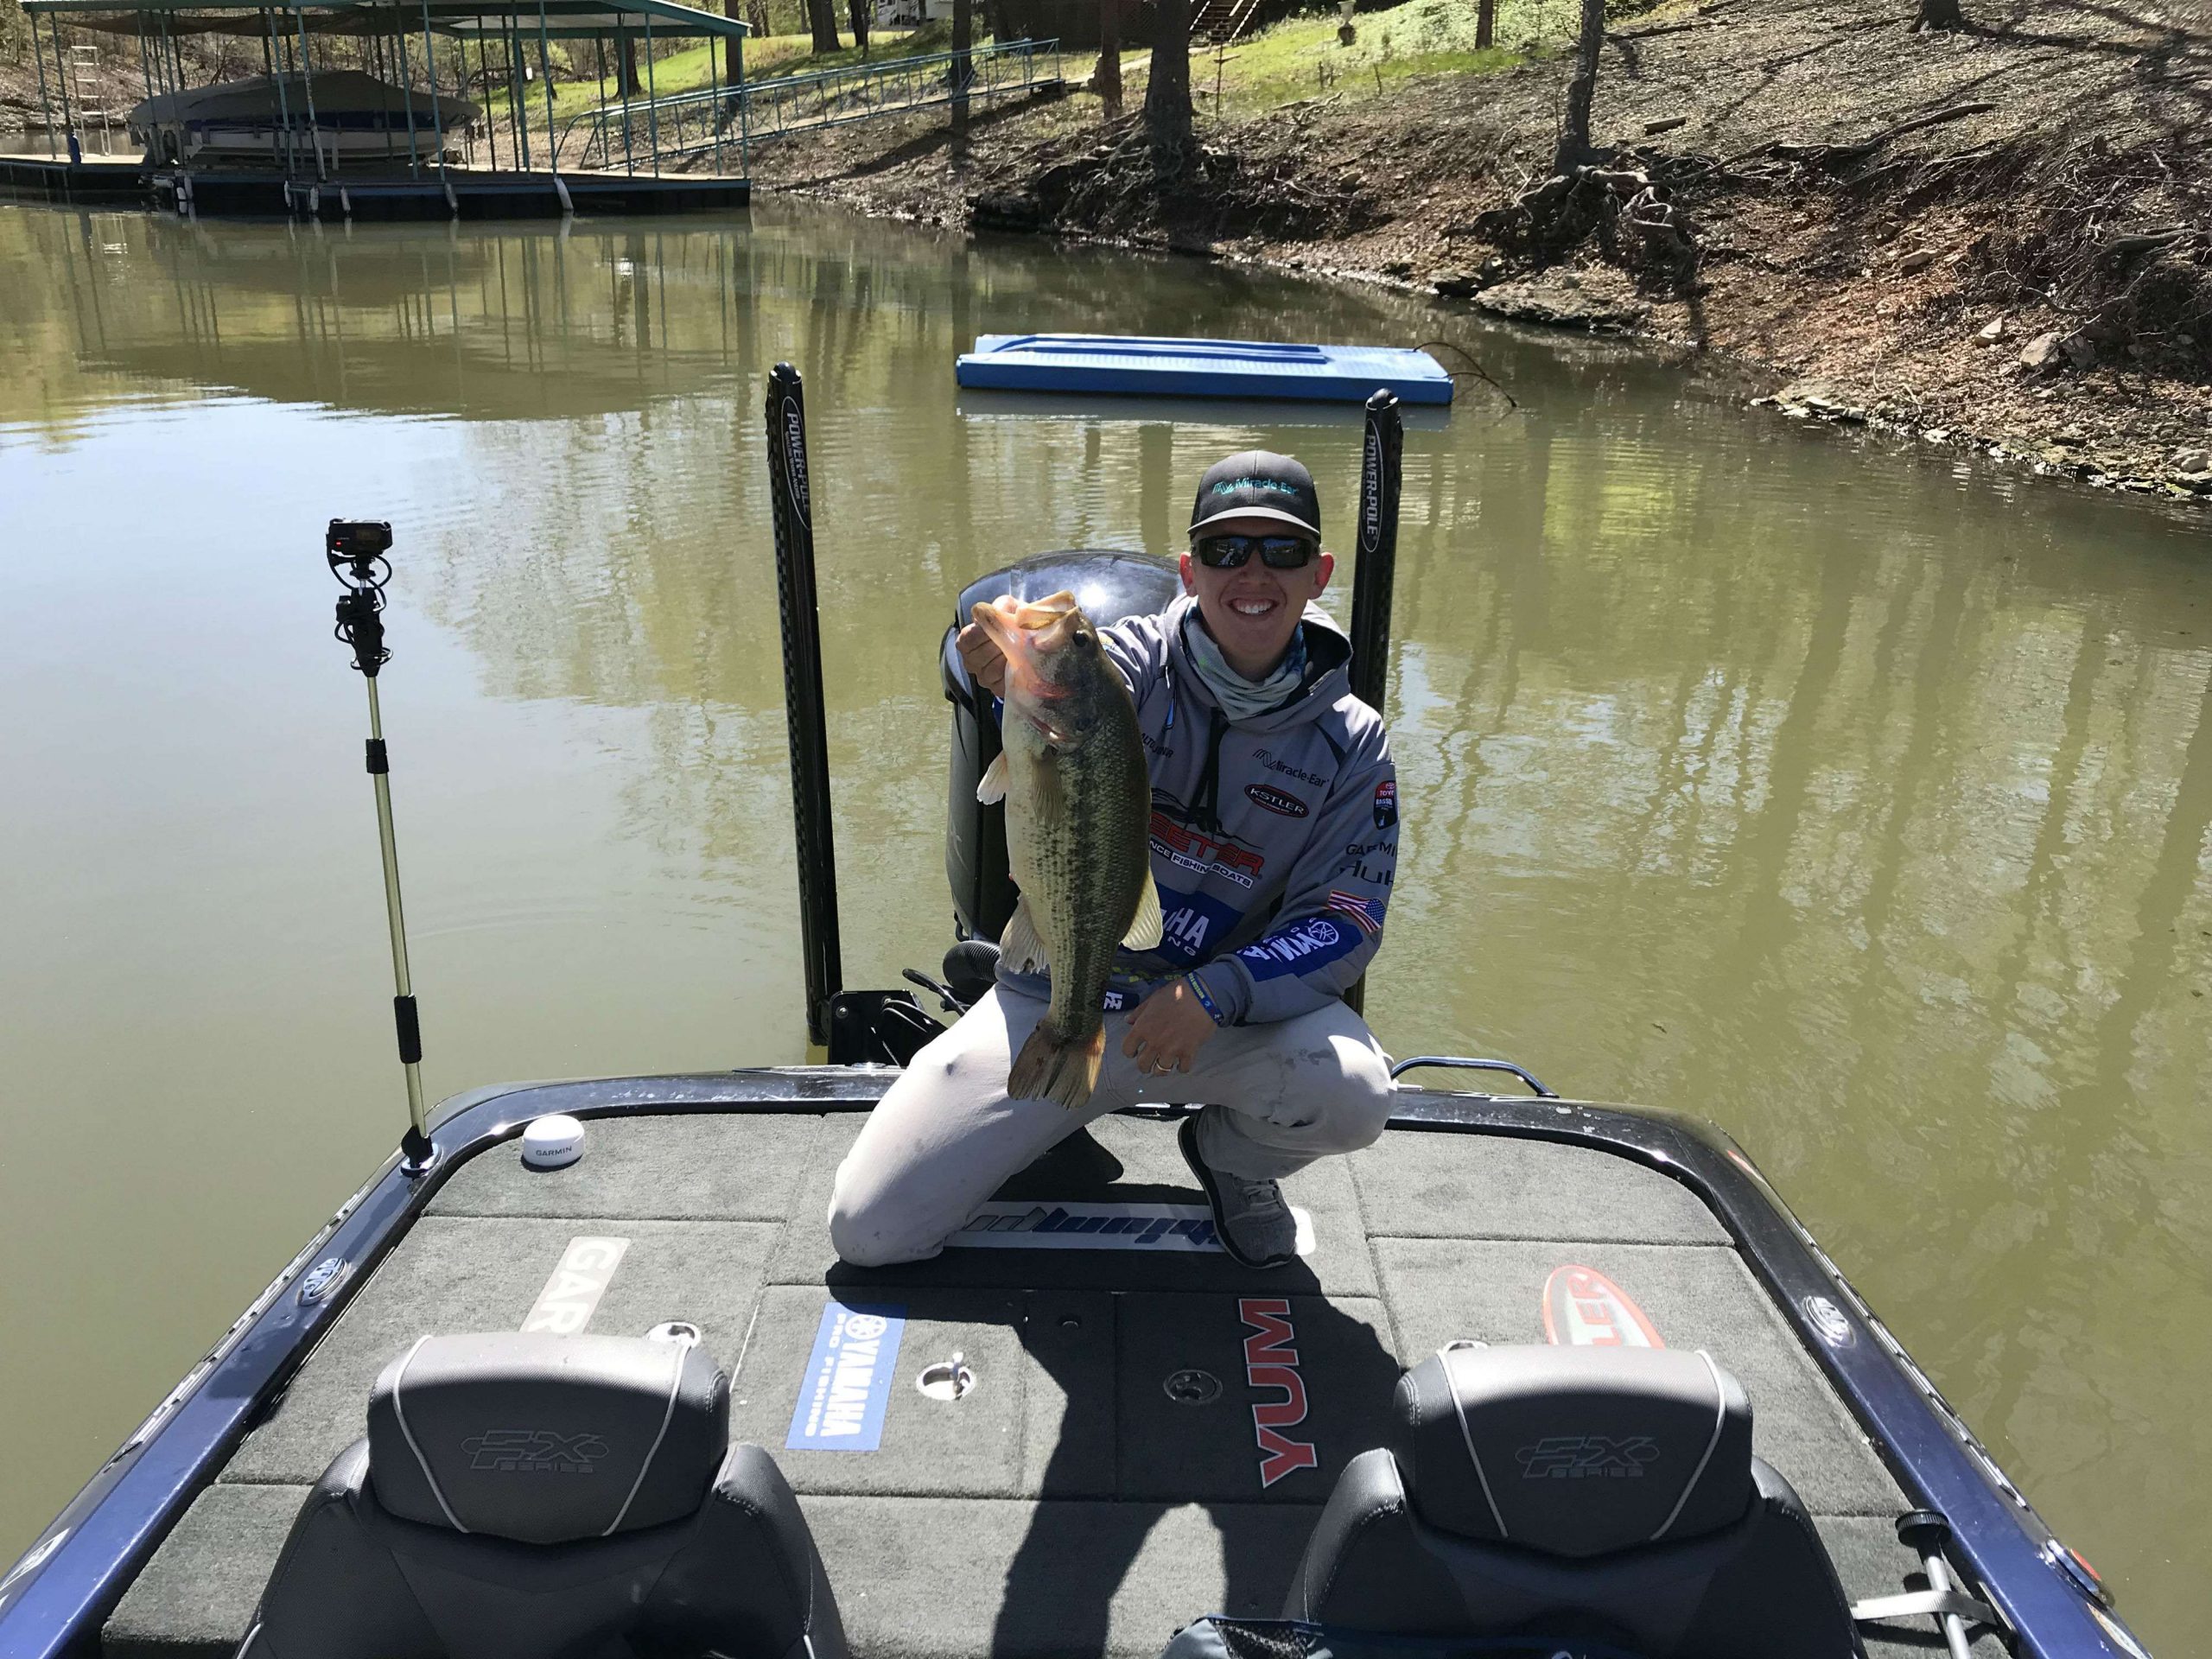 Alton Jones, Jr. lands a big one after more than a 2-minute fight on light line and tackle!







